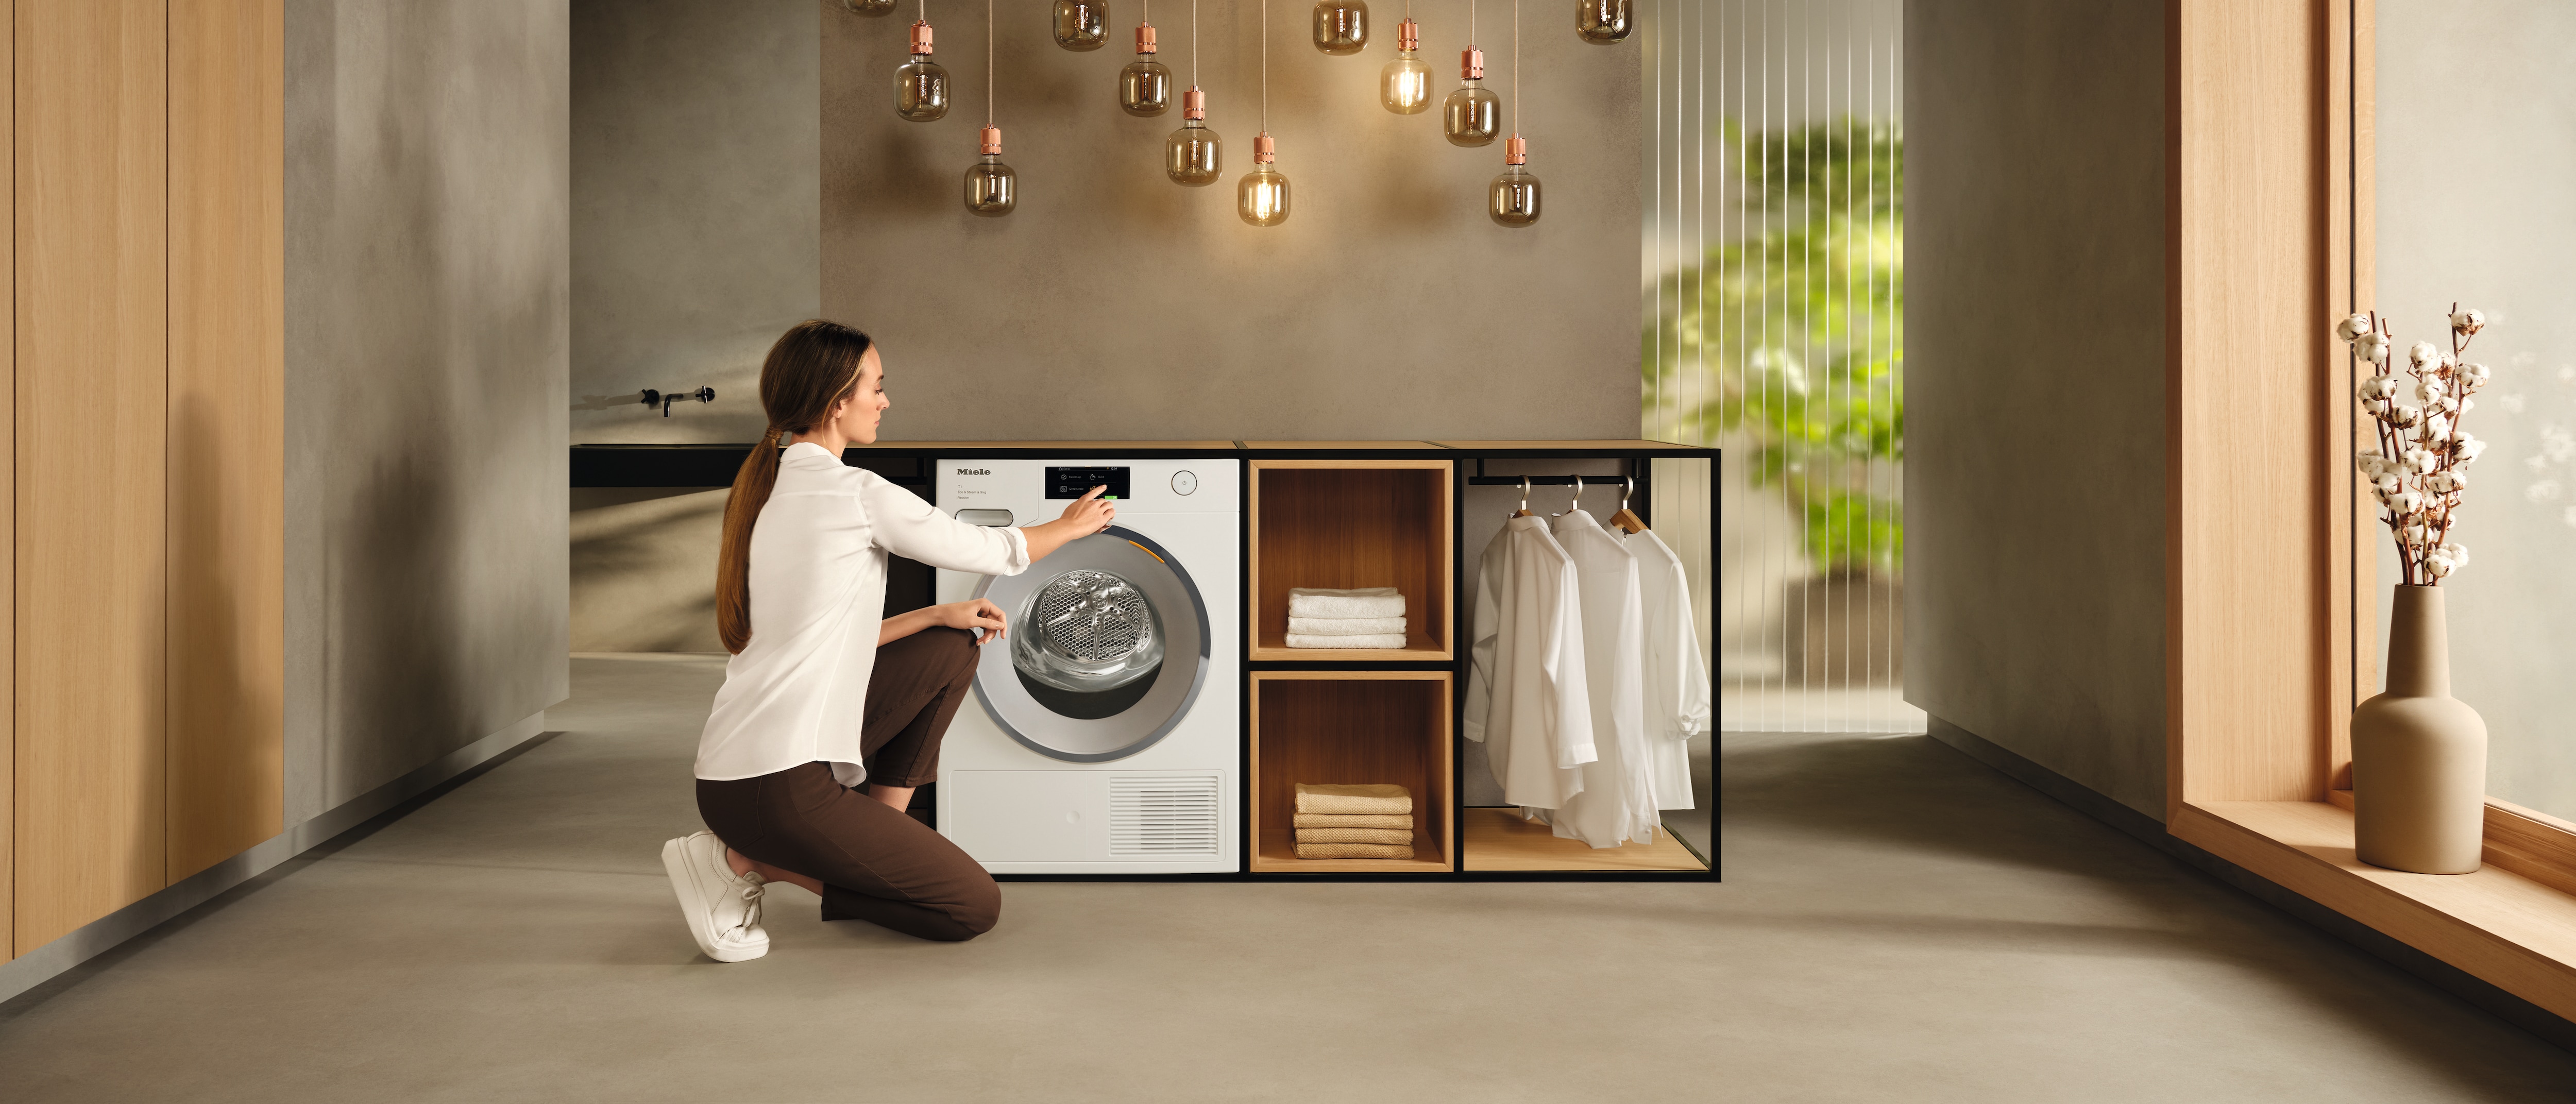 A woman adjusting the setting on the Miele dryer with EcoDry